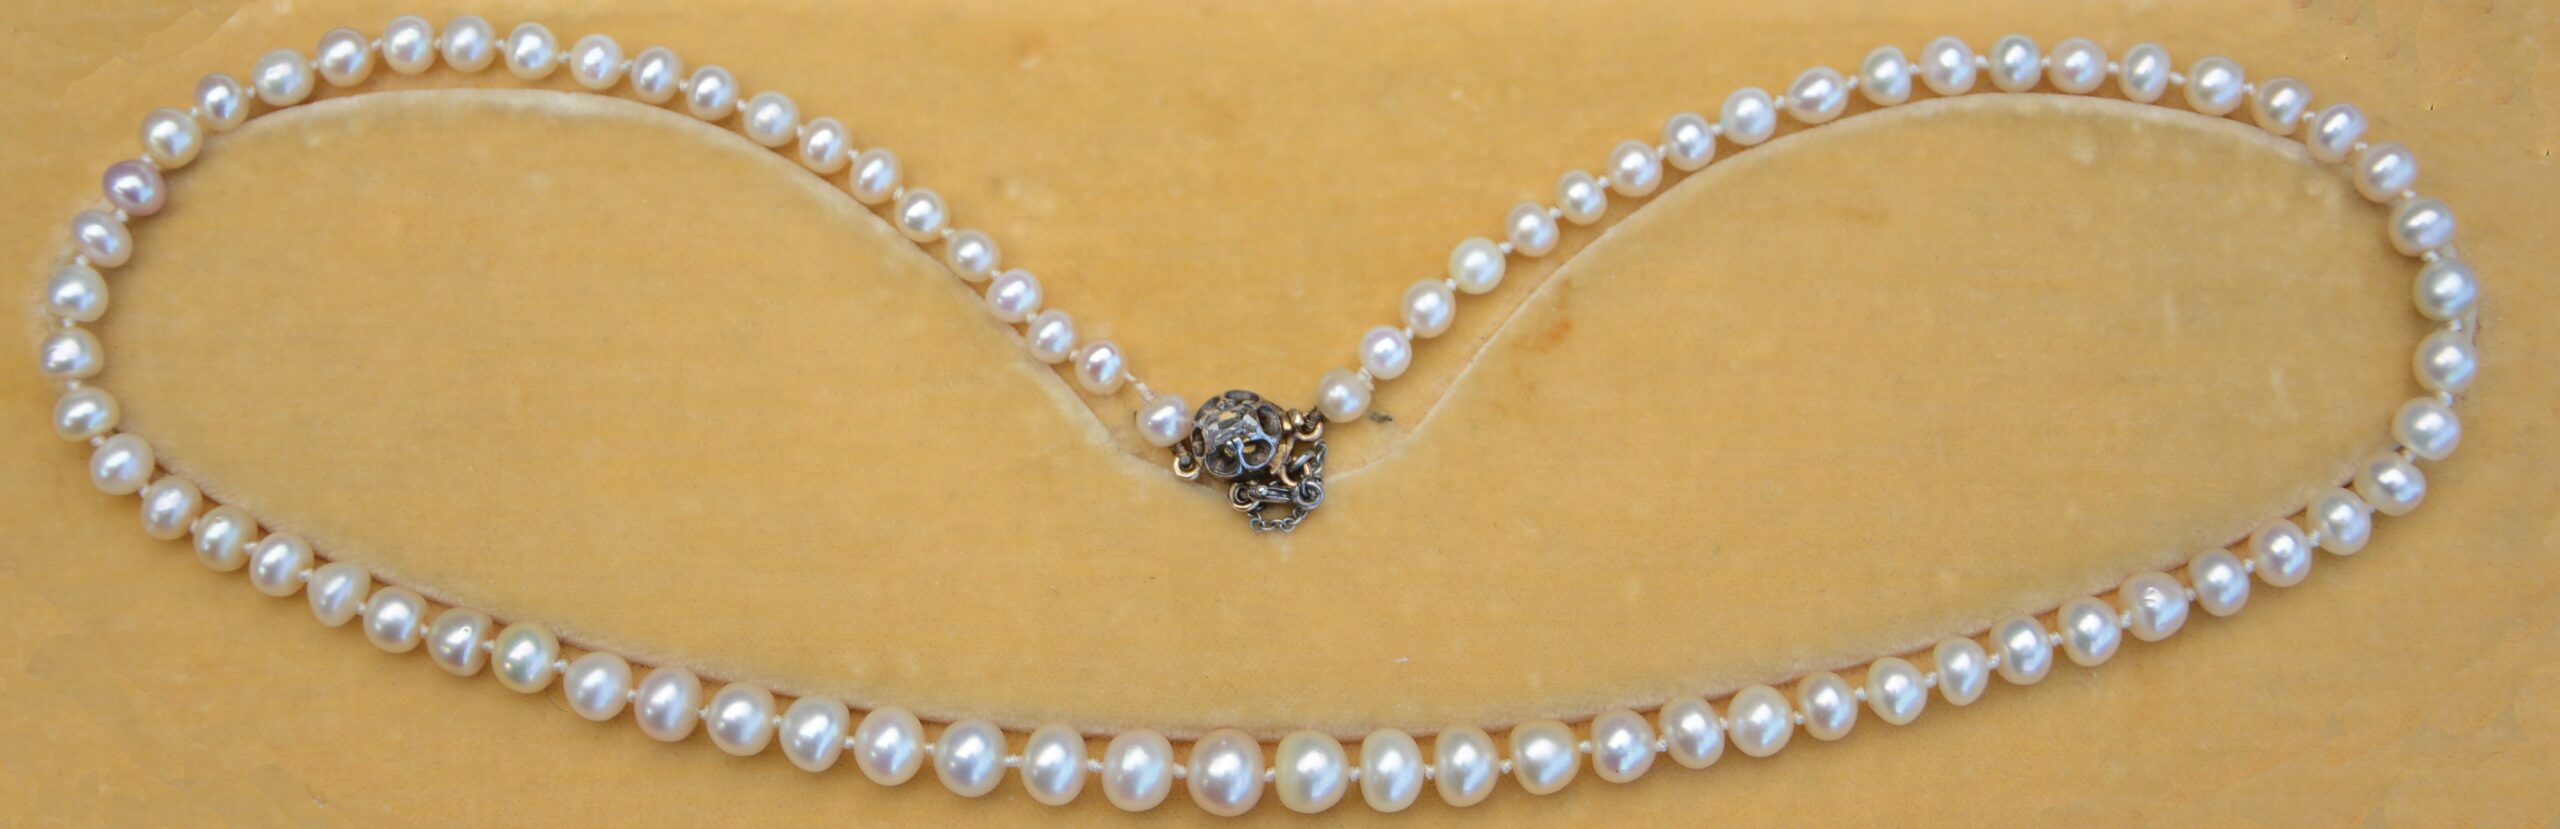 Natural pearls with a silver topped gold clasp containing a rose cut diamond